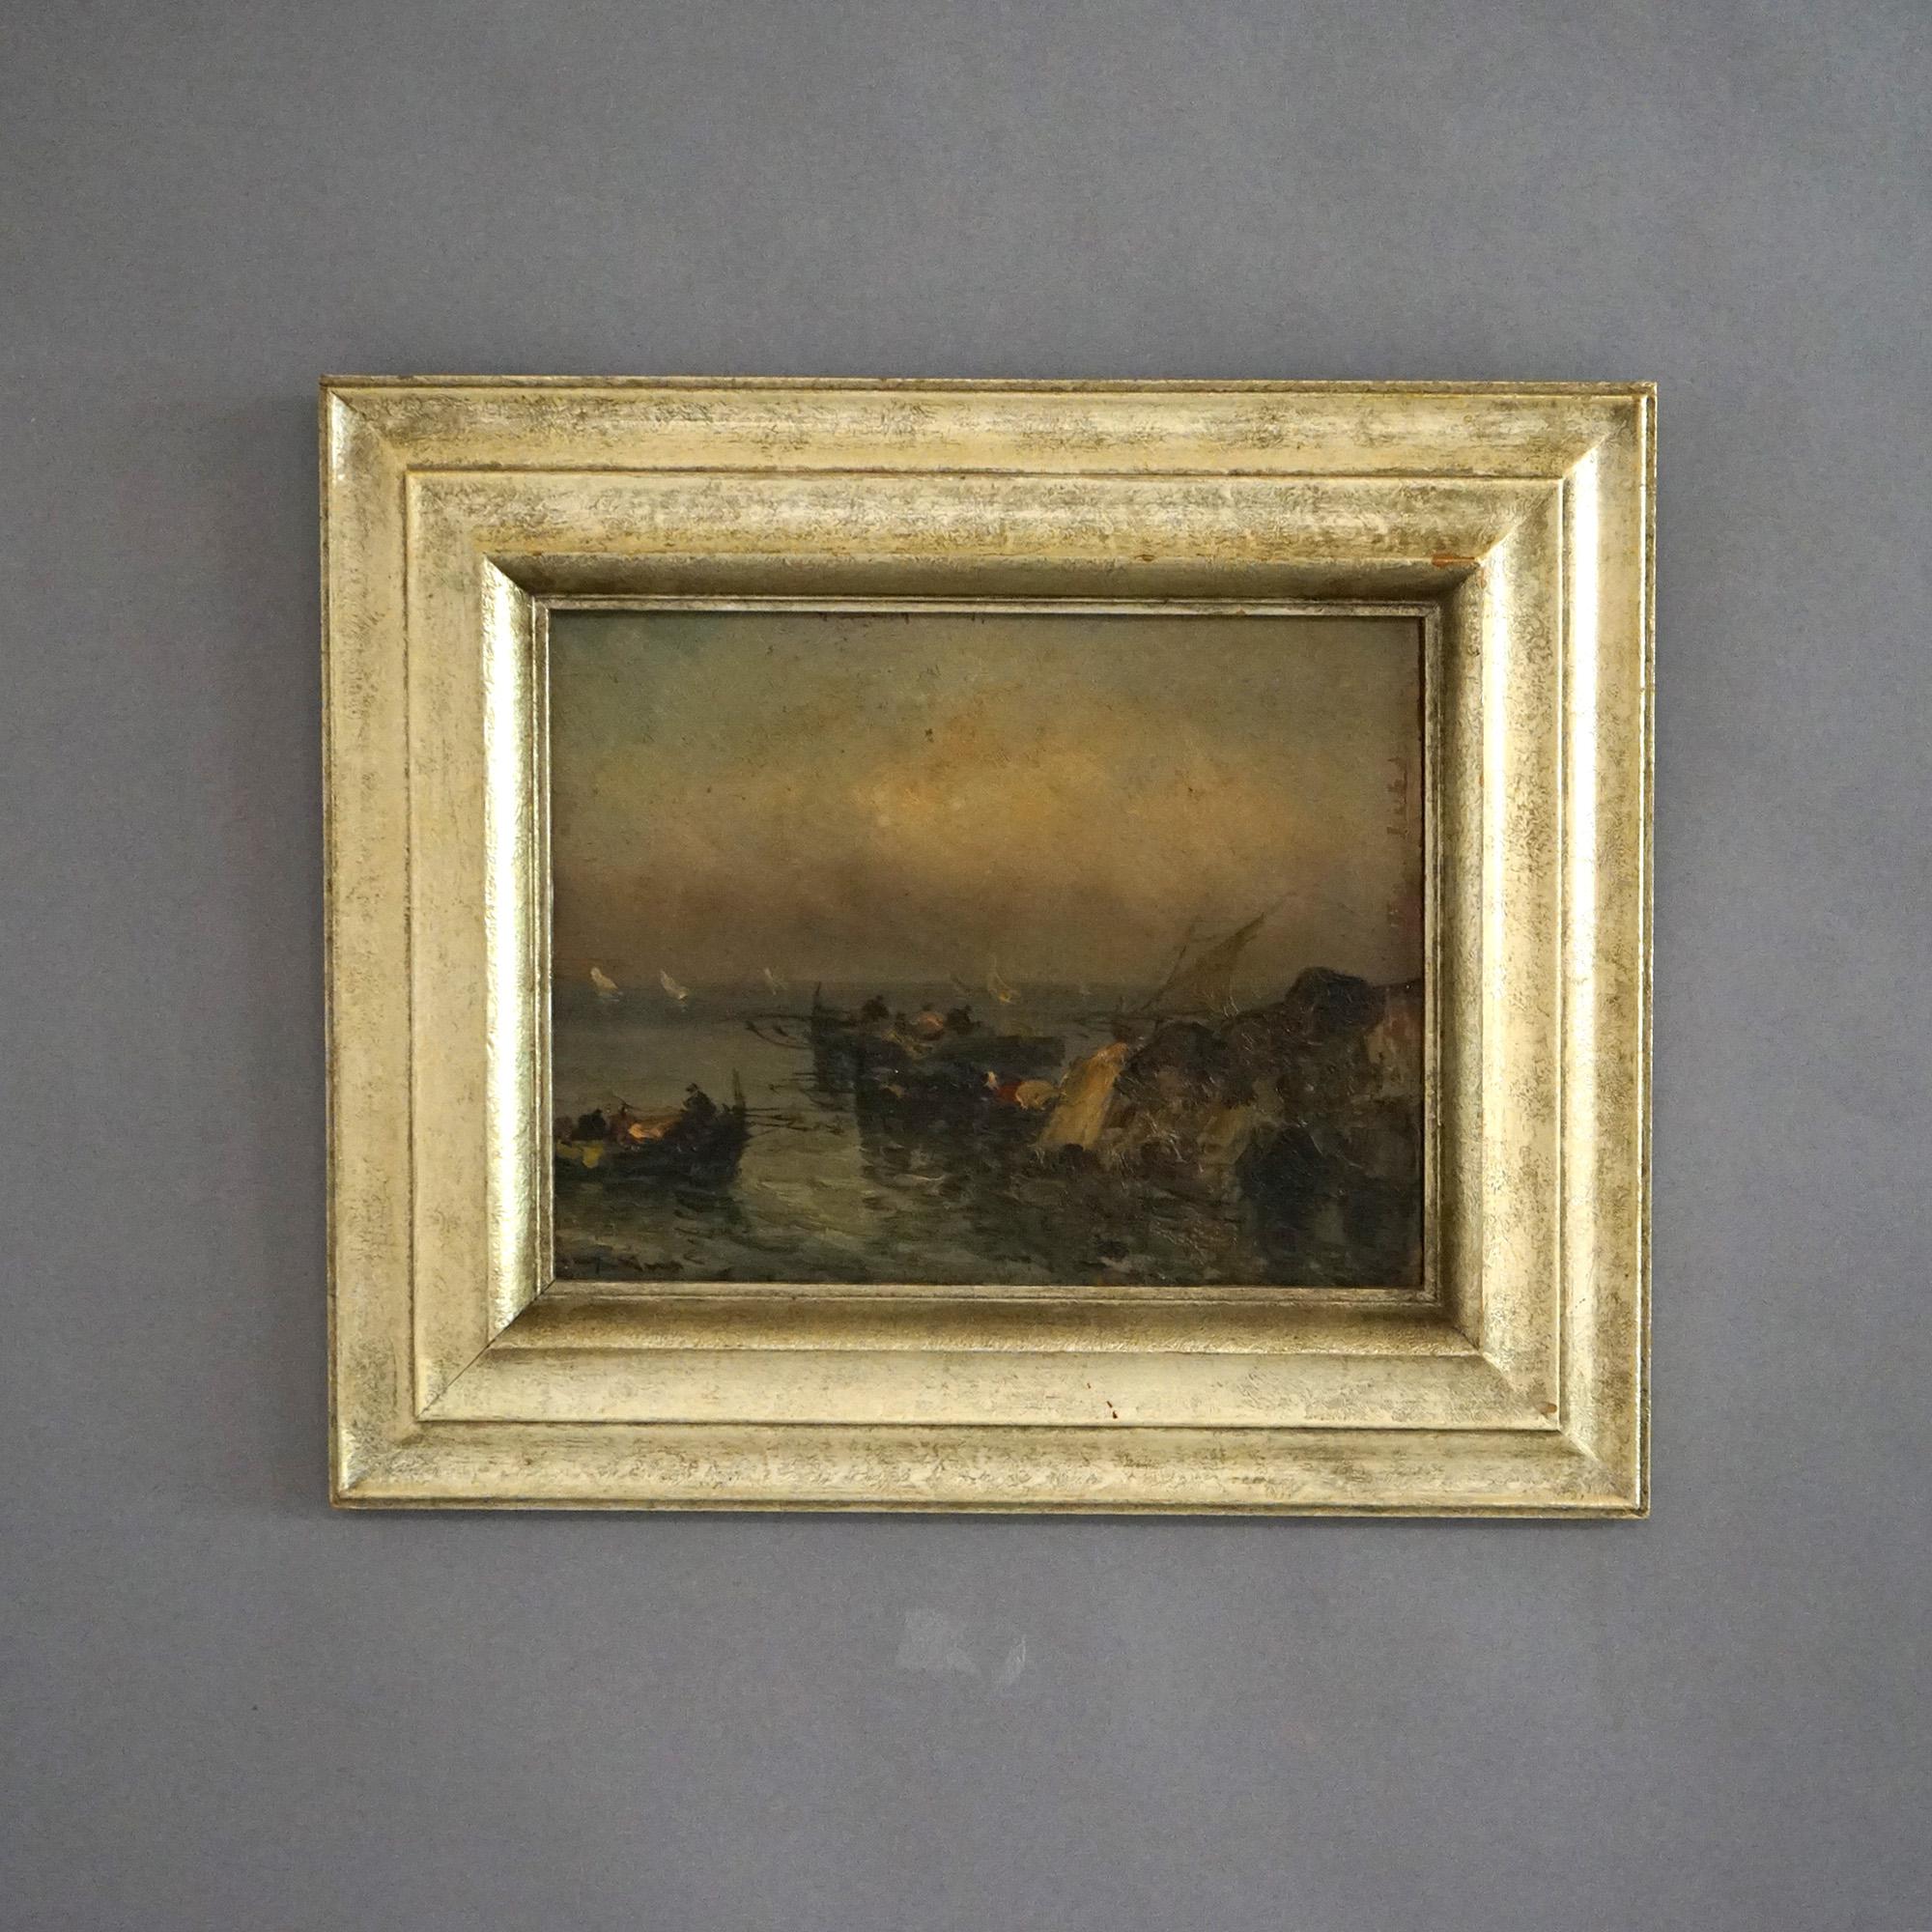 An antique Impressionist painting offers oil on board seascape with figures and boats, Bringing in The Catch, 19th century

Measures - 14.75